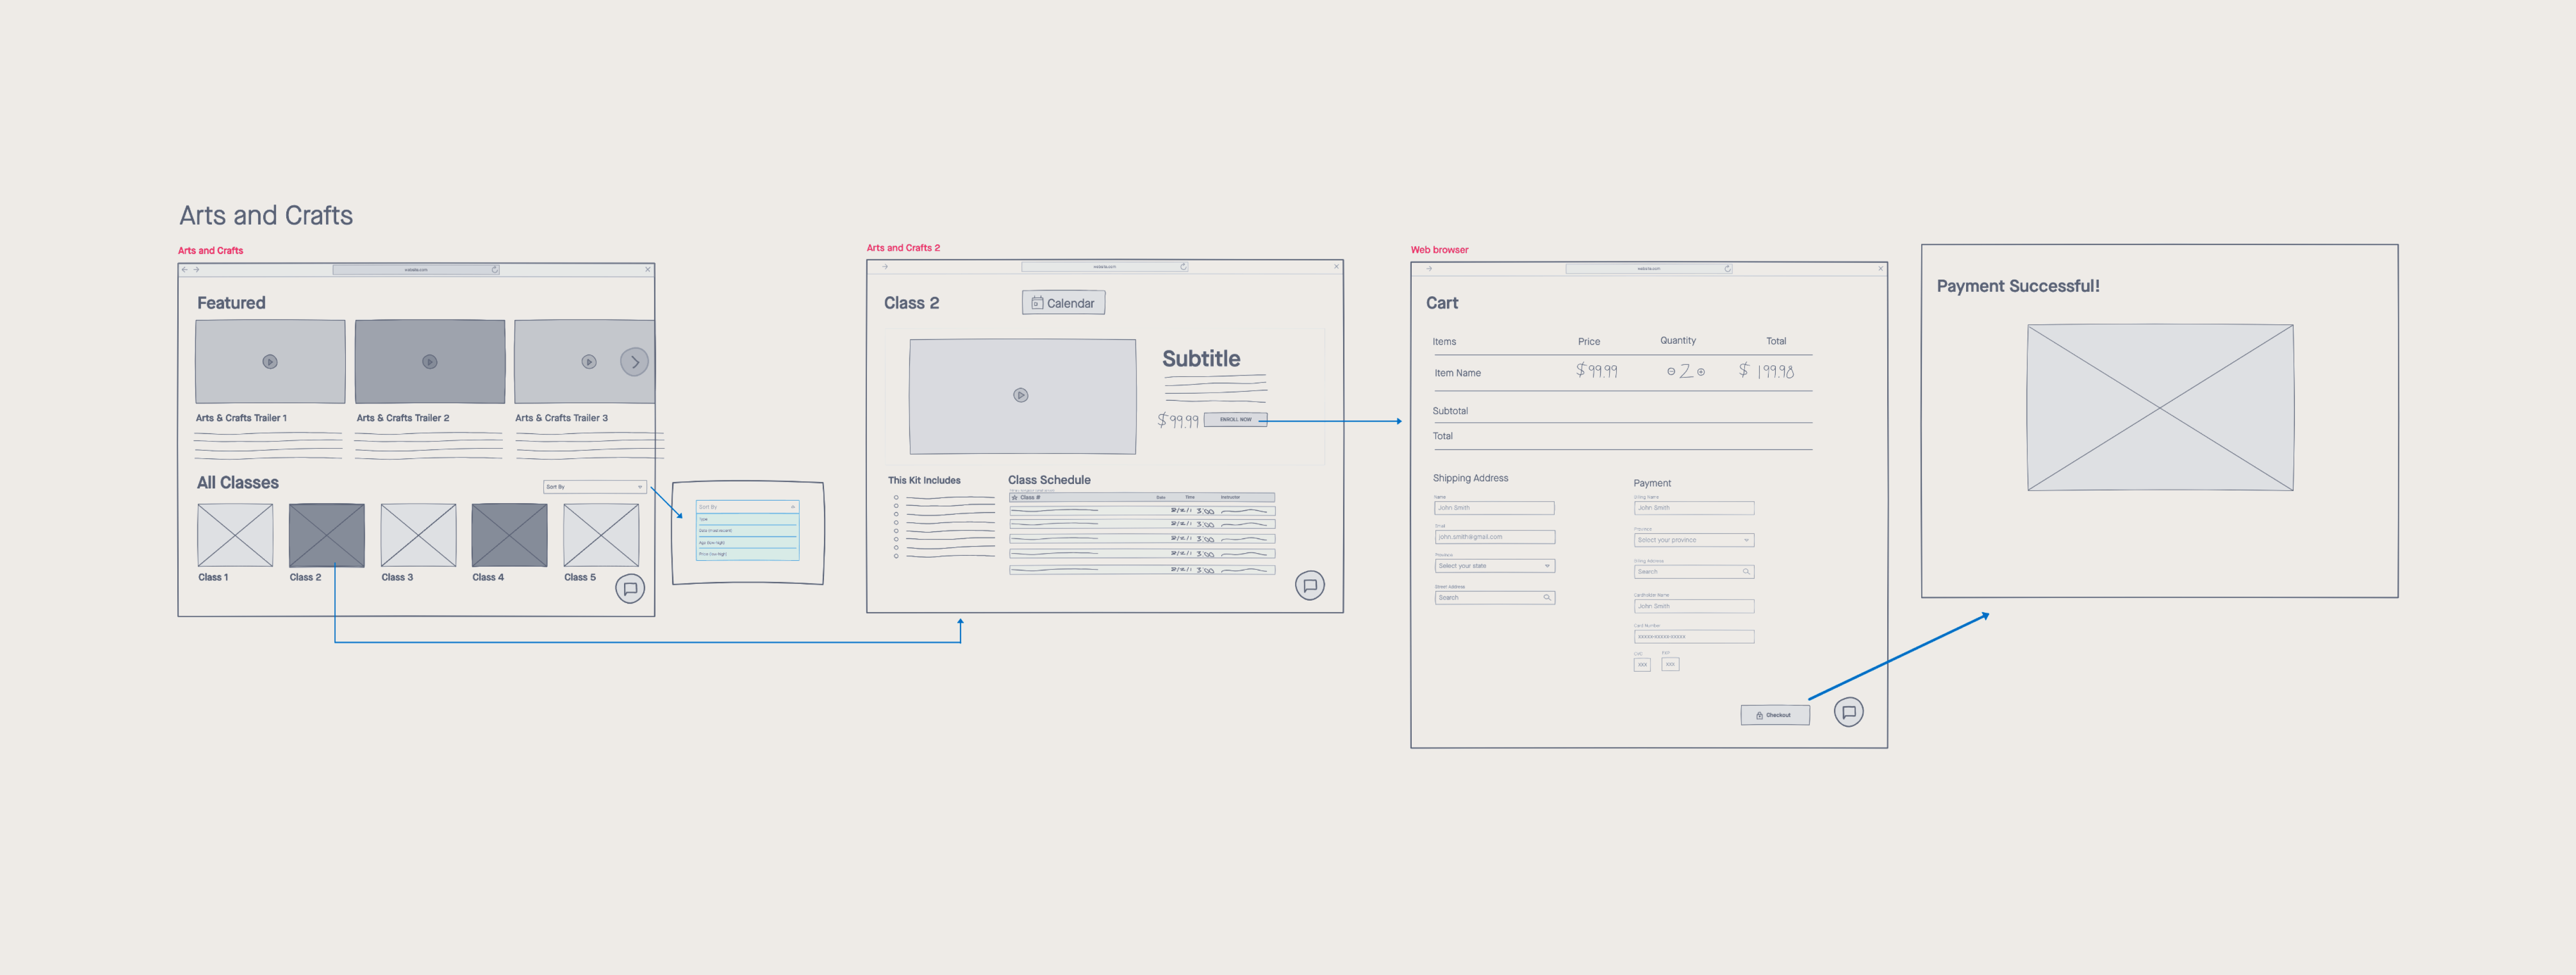 Rough wireframes